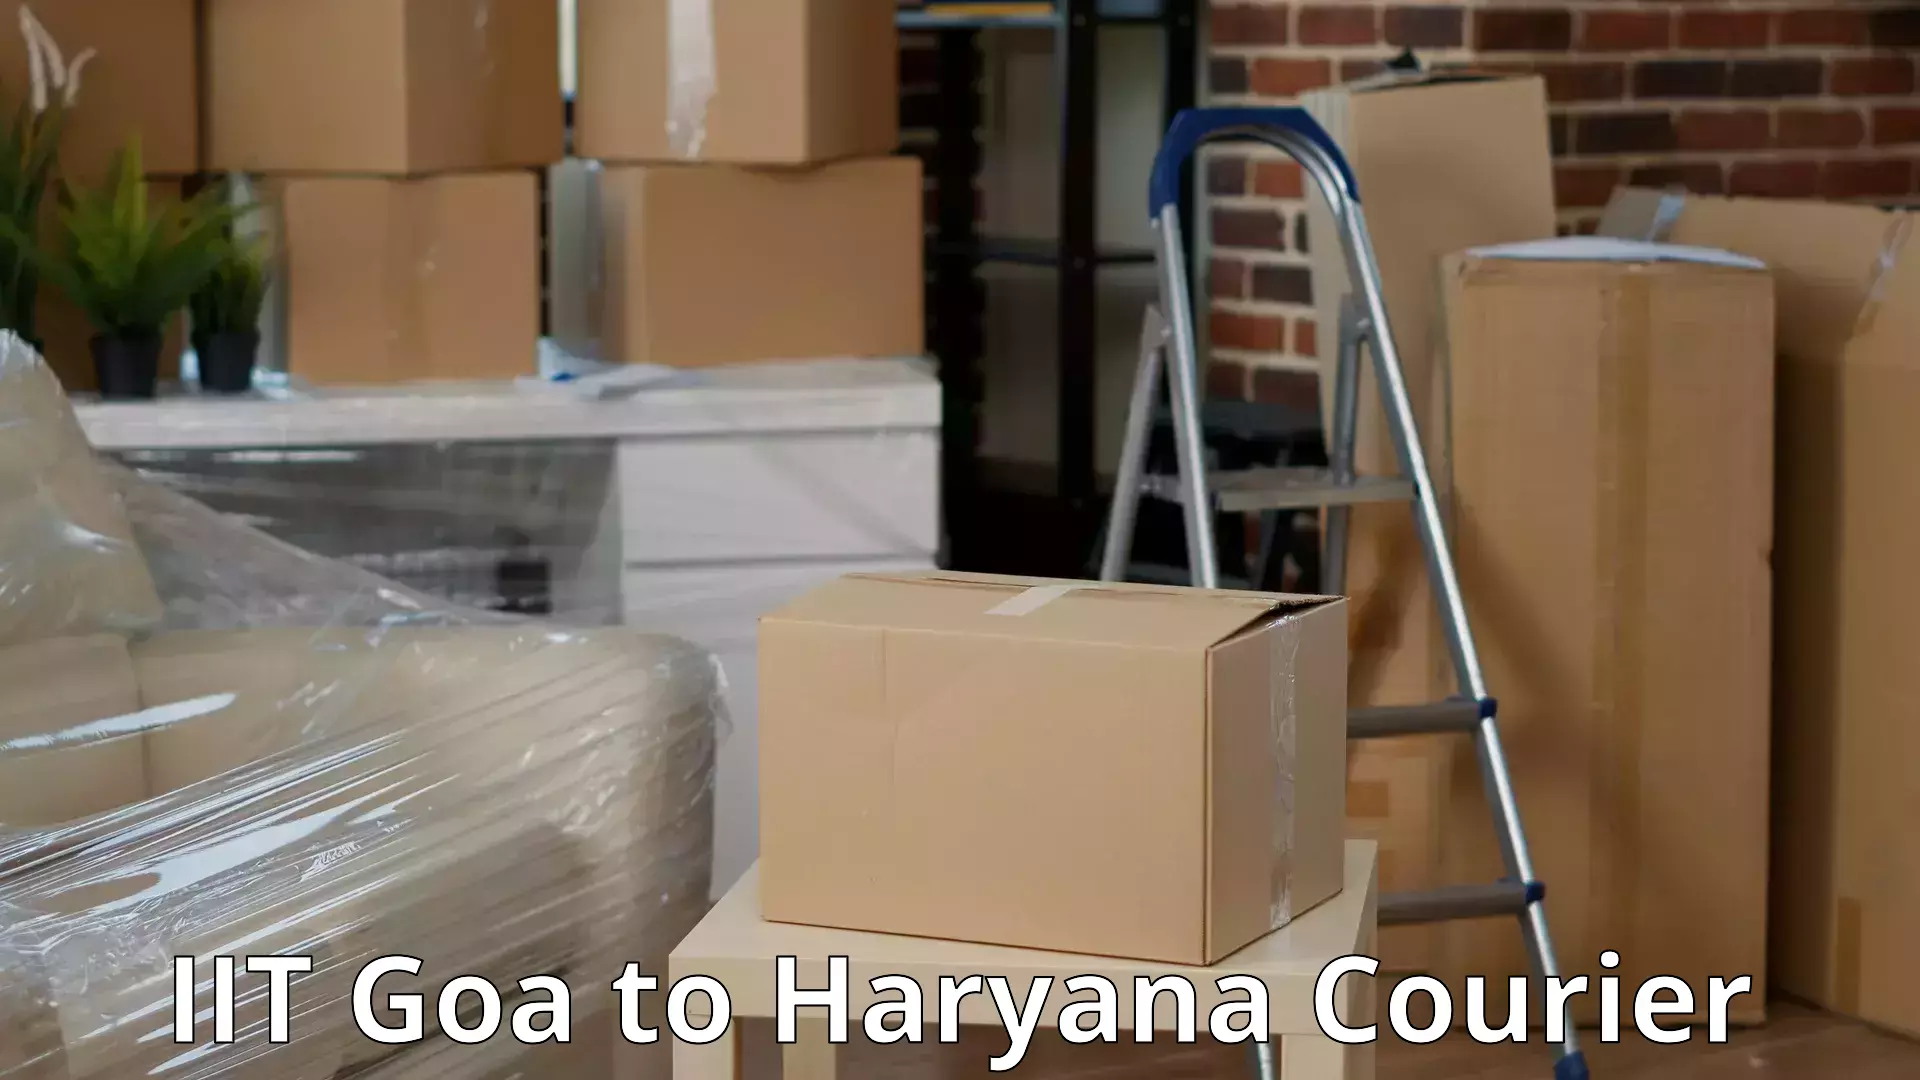 Moving and handling services IIT Goa to Dharuhera